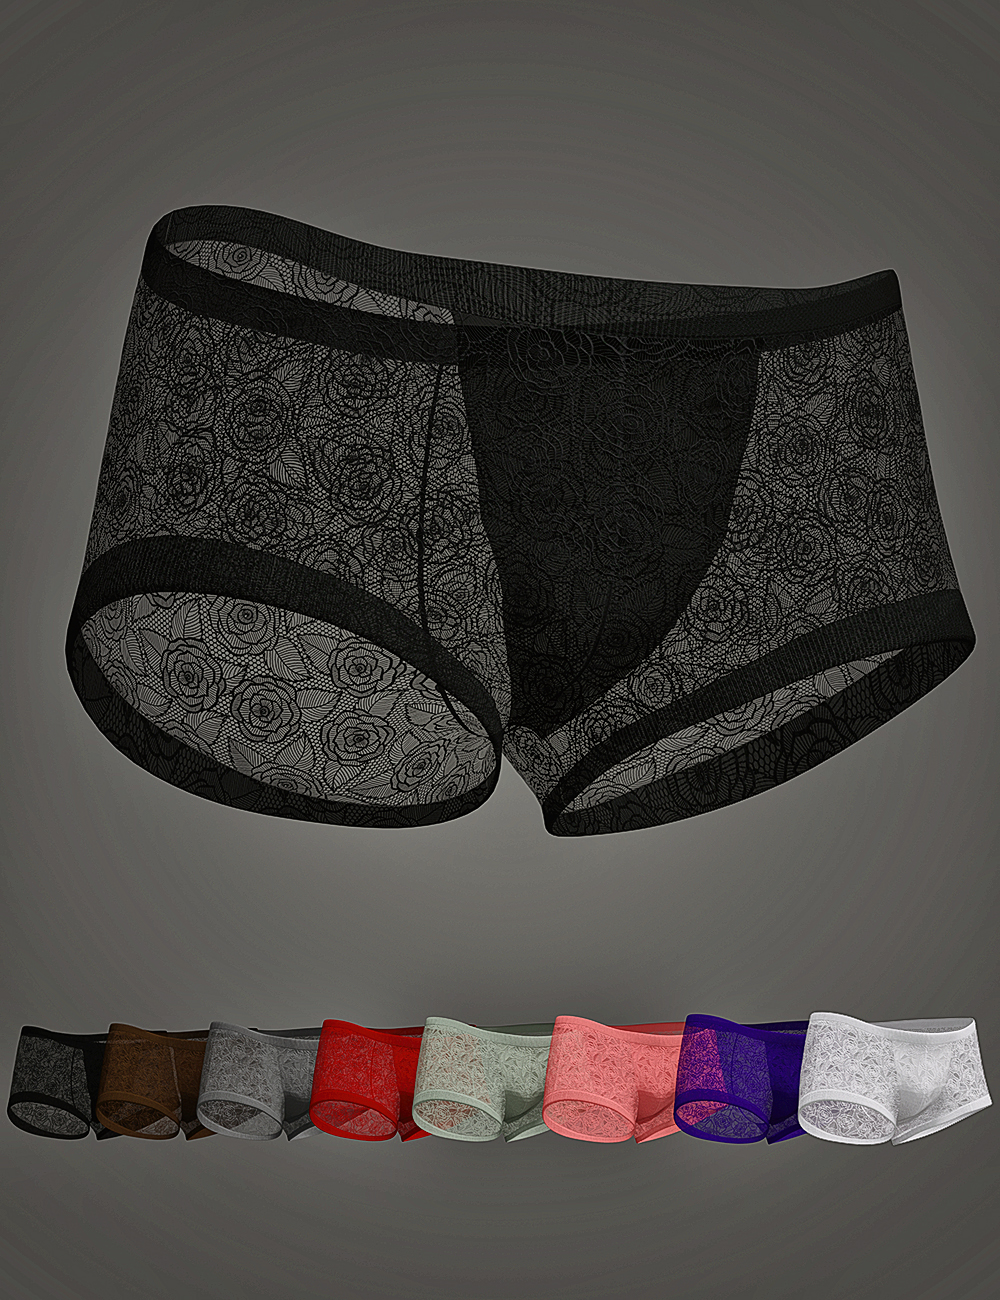 XF Bunny Lace Lingerie Briefs for Genesis 8 and 8.1 Males by: xtrart-3d, 3D Models by Daz 3D